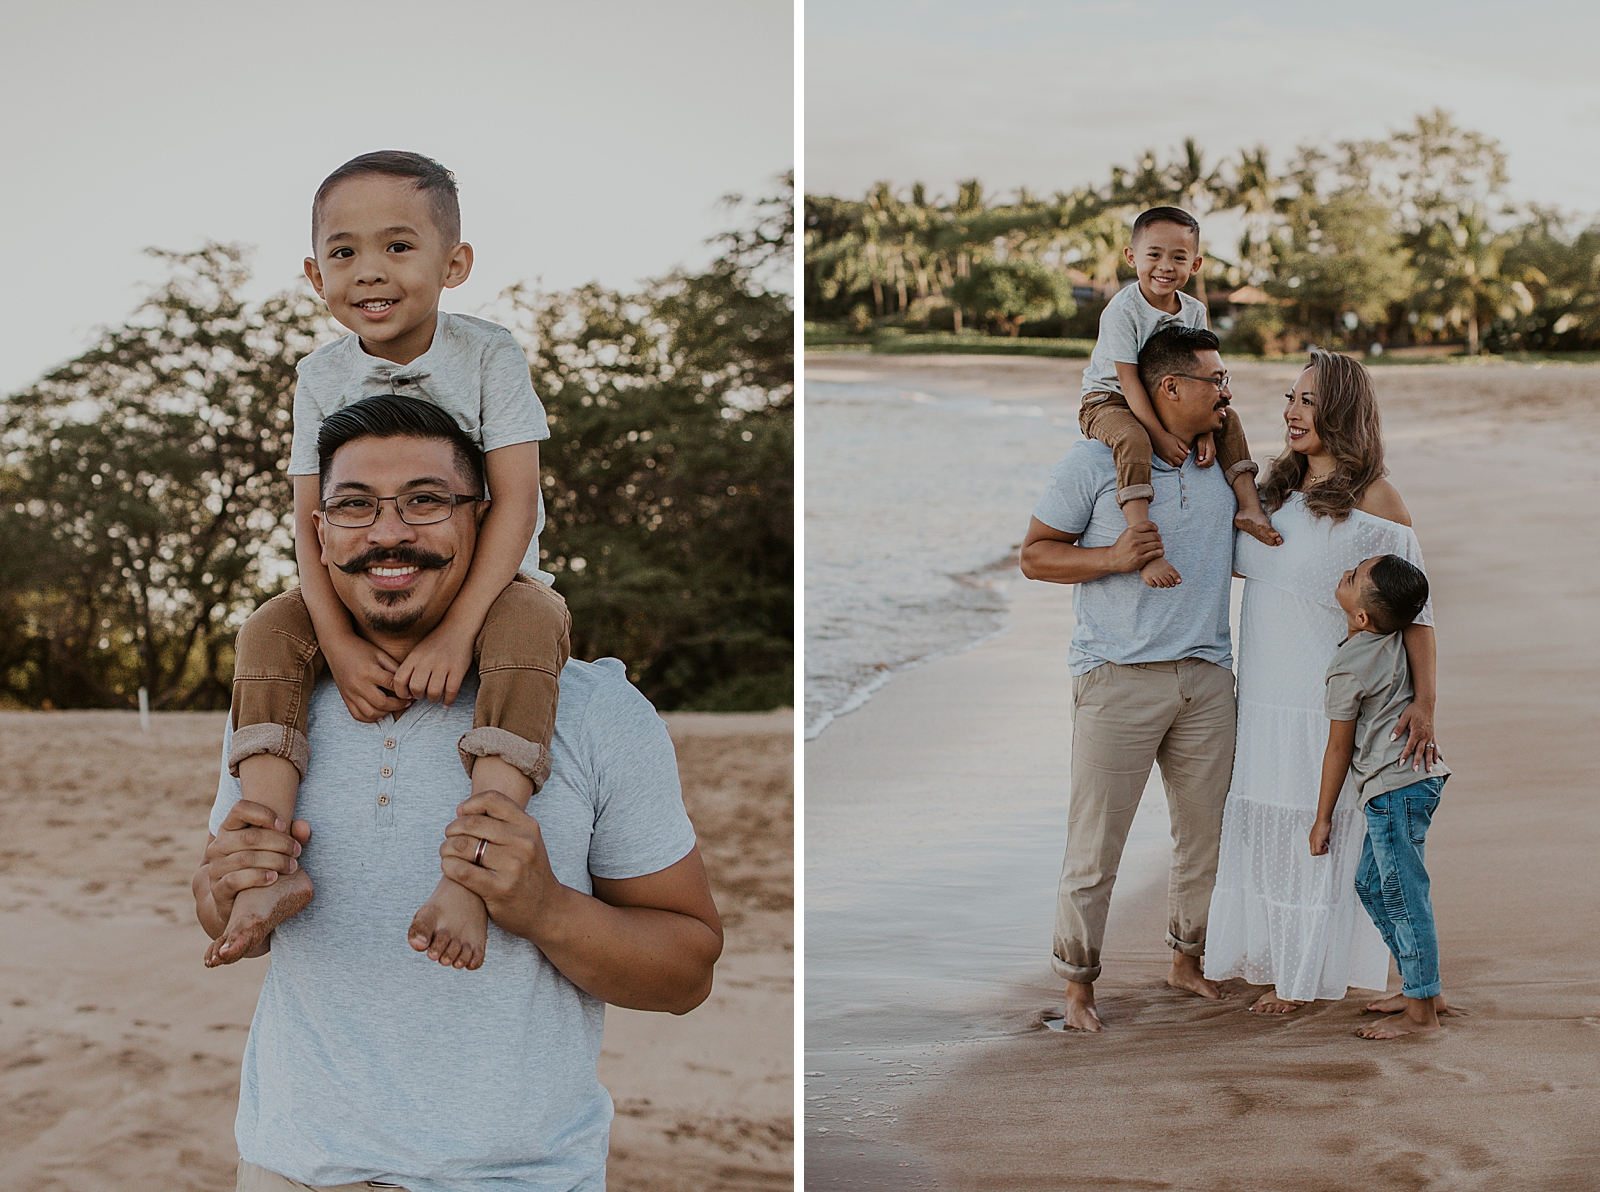 Dad carrying son on his shoulders and Mom holding other son on the side on the sand